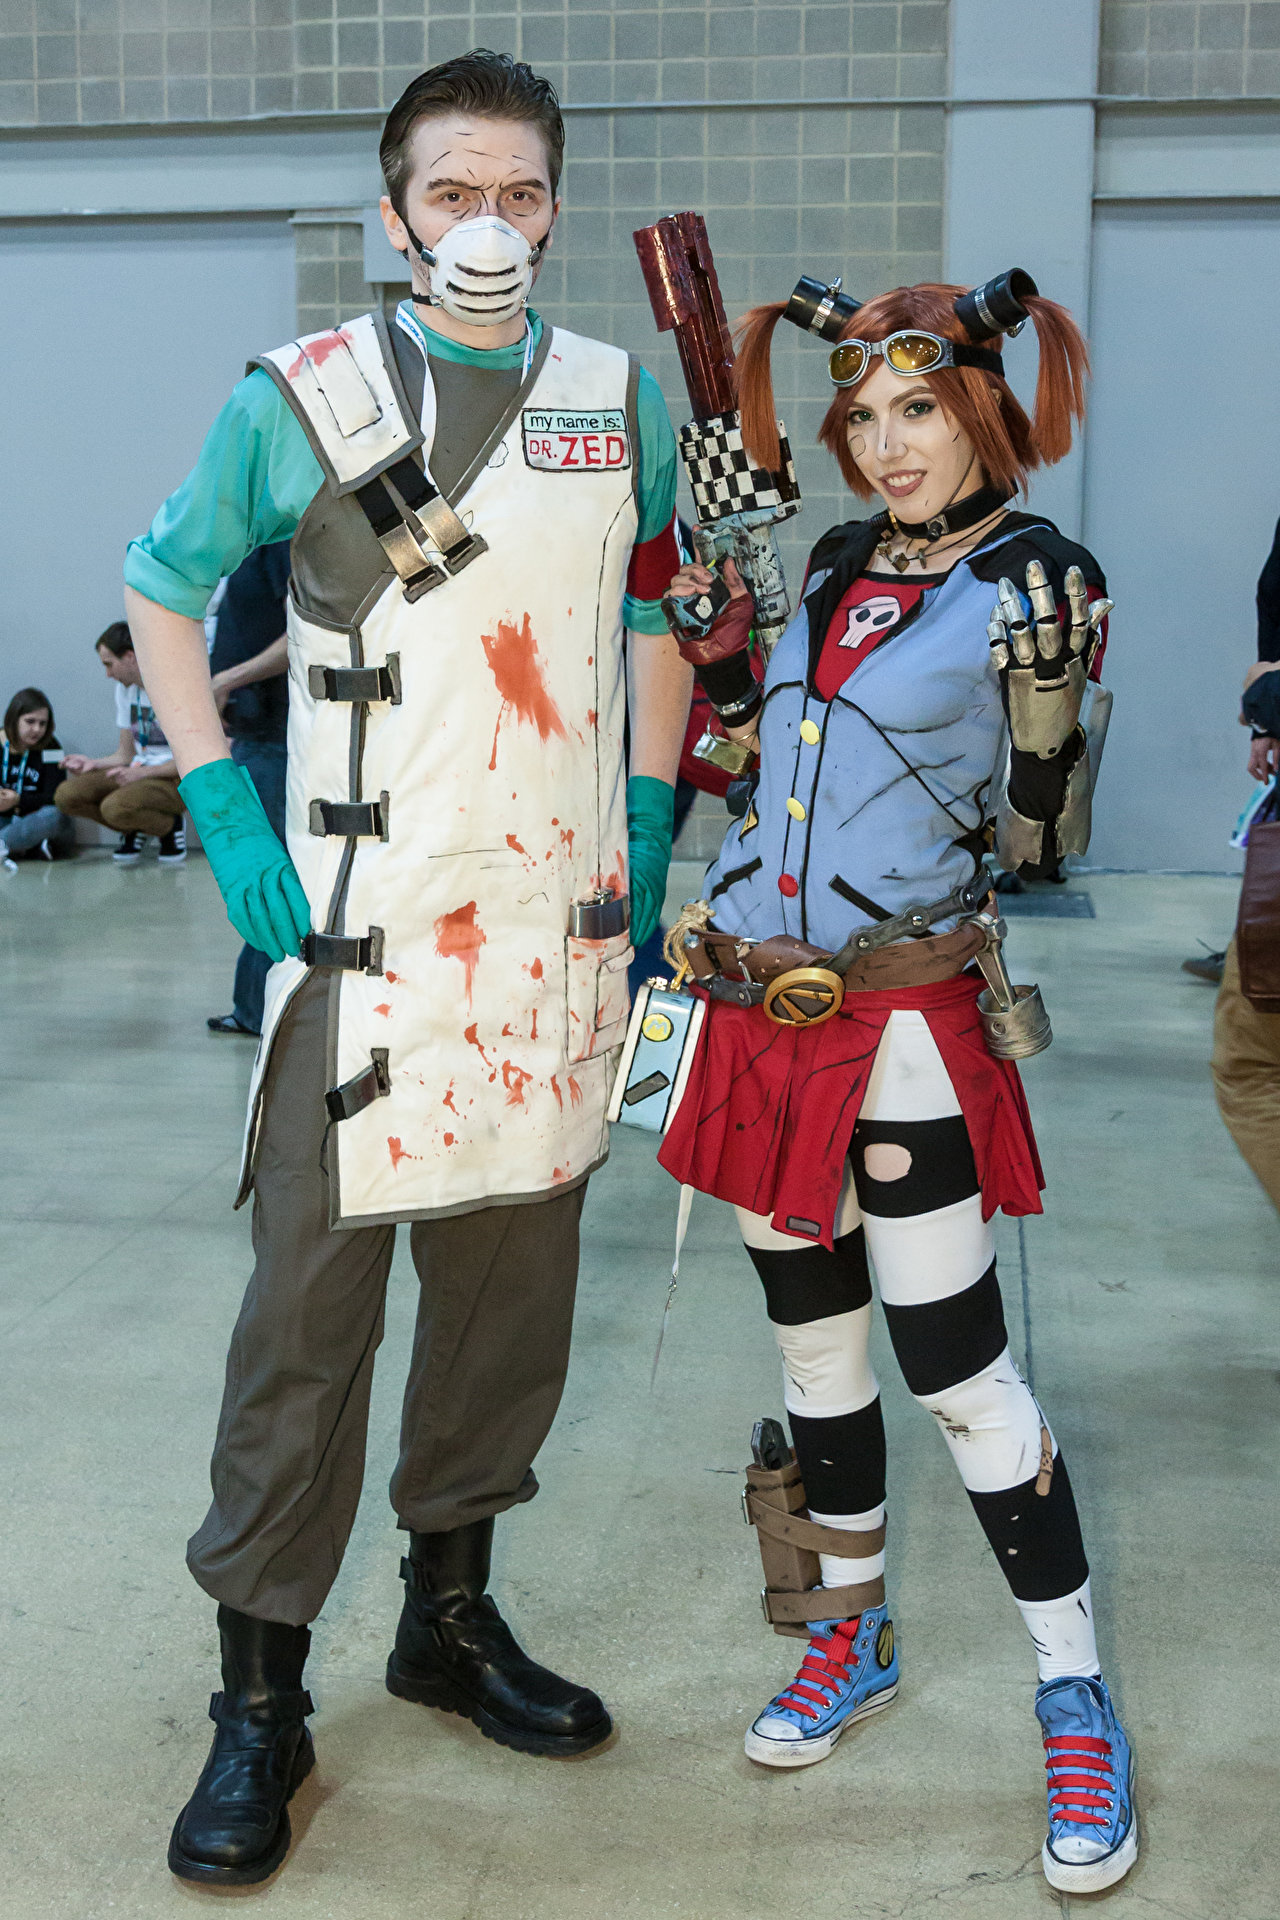 Cospix.net photo featuring Balorn and Viverra Cosplay